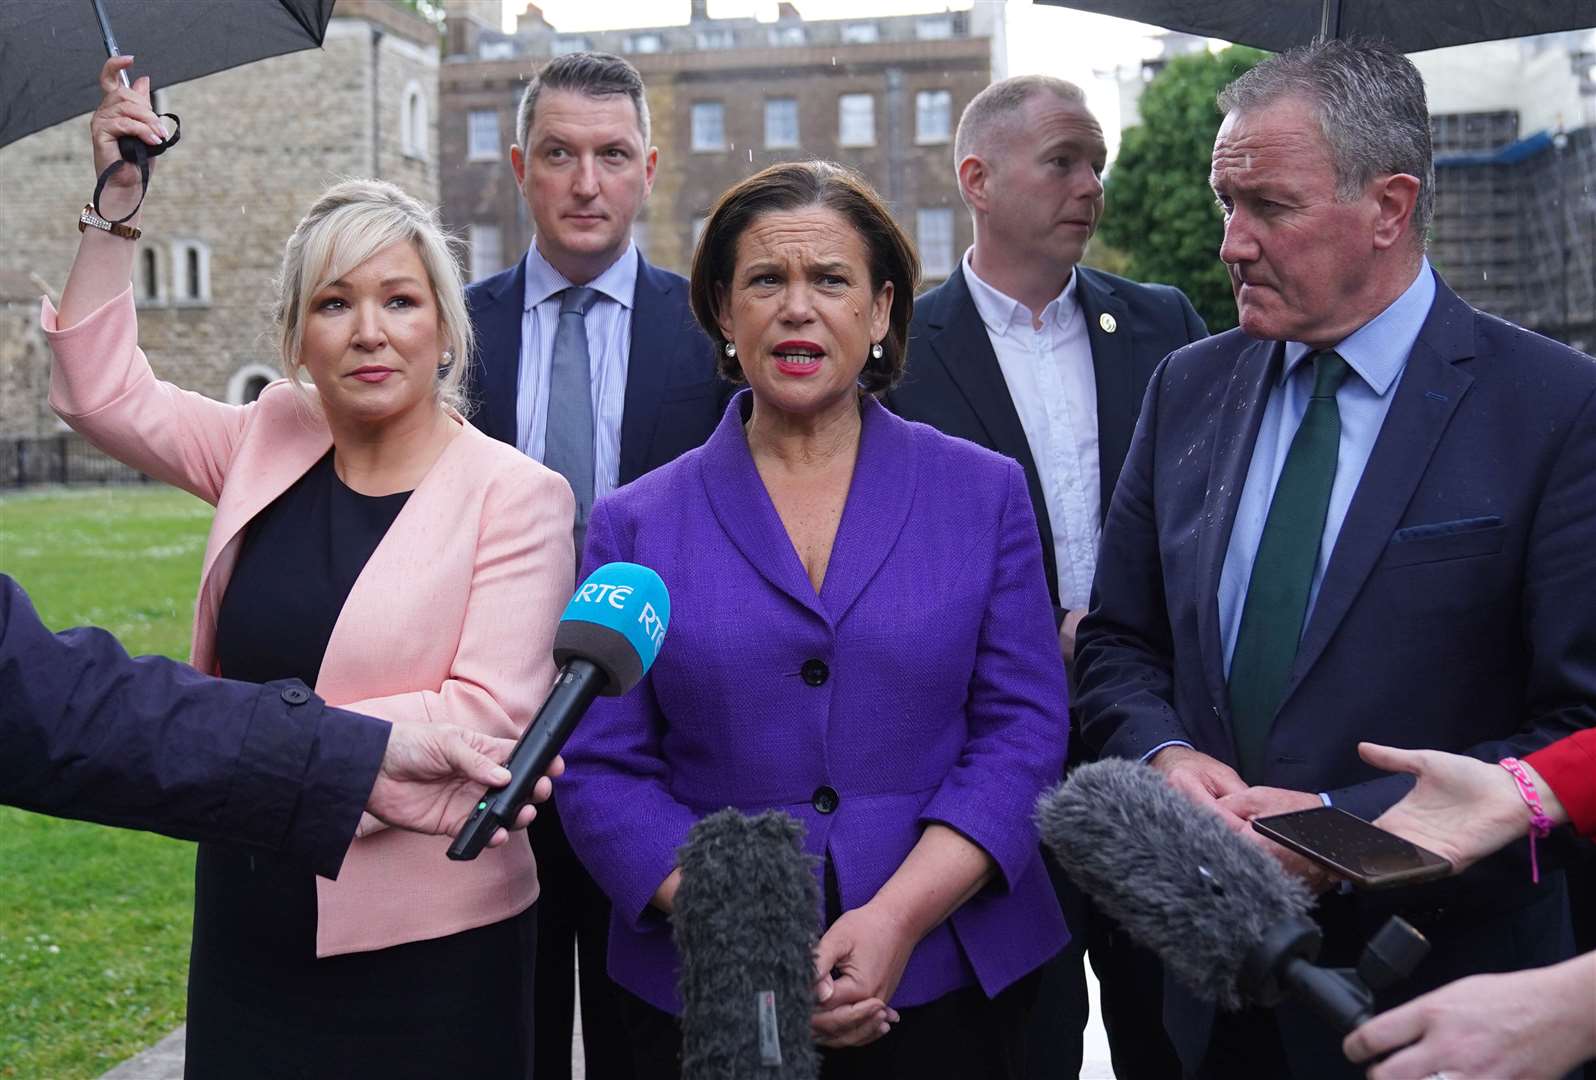 Sinn Fein’s Michelle O’Neill, Mary Lou McDonald and Conor Murphy outside the Palace of Westminster (Stefan Rousseau/PA)